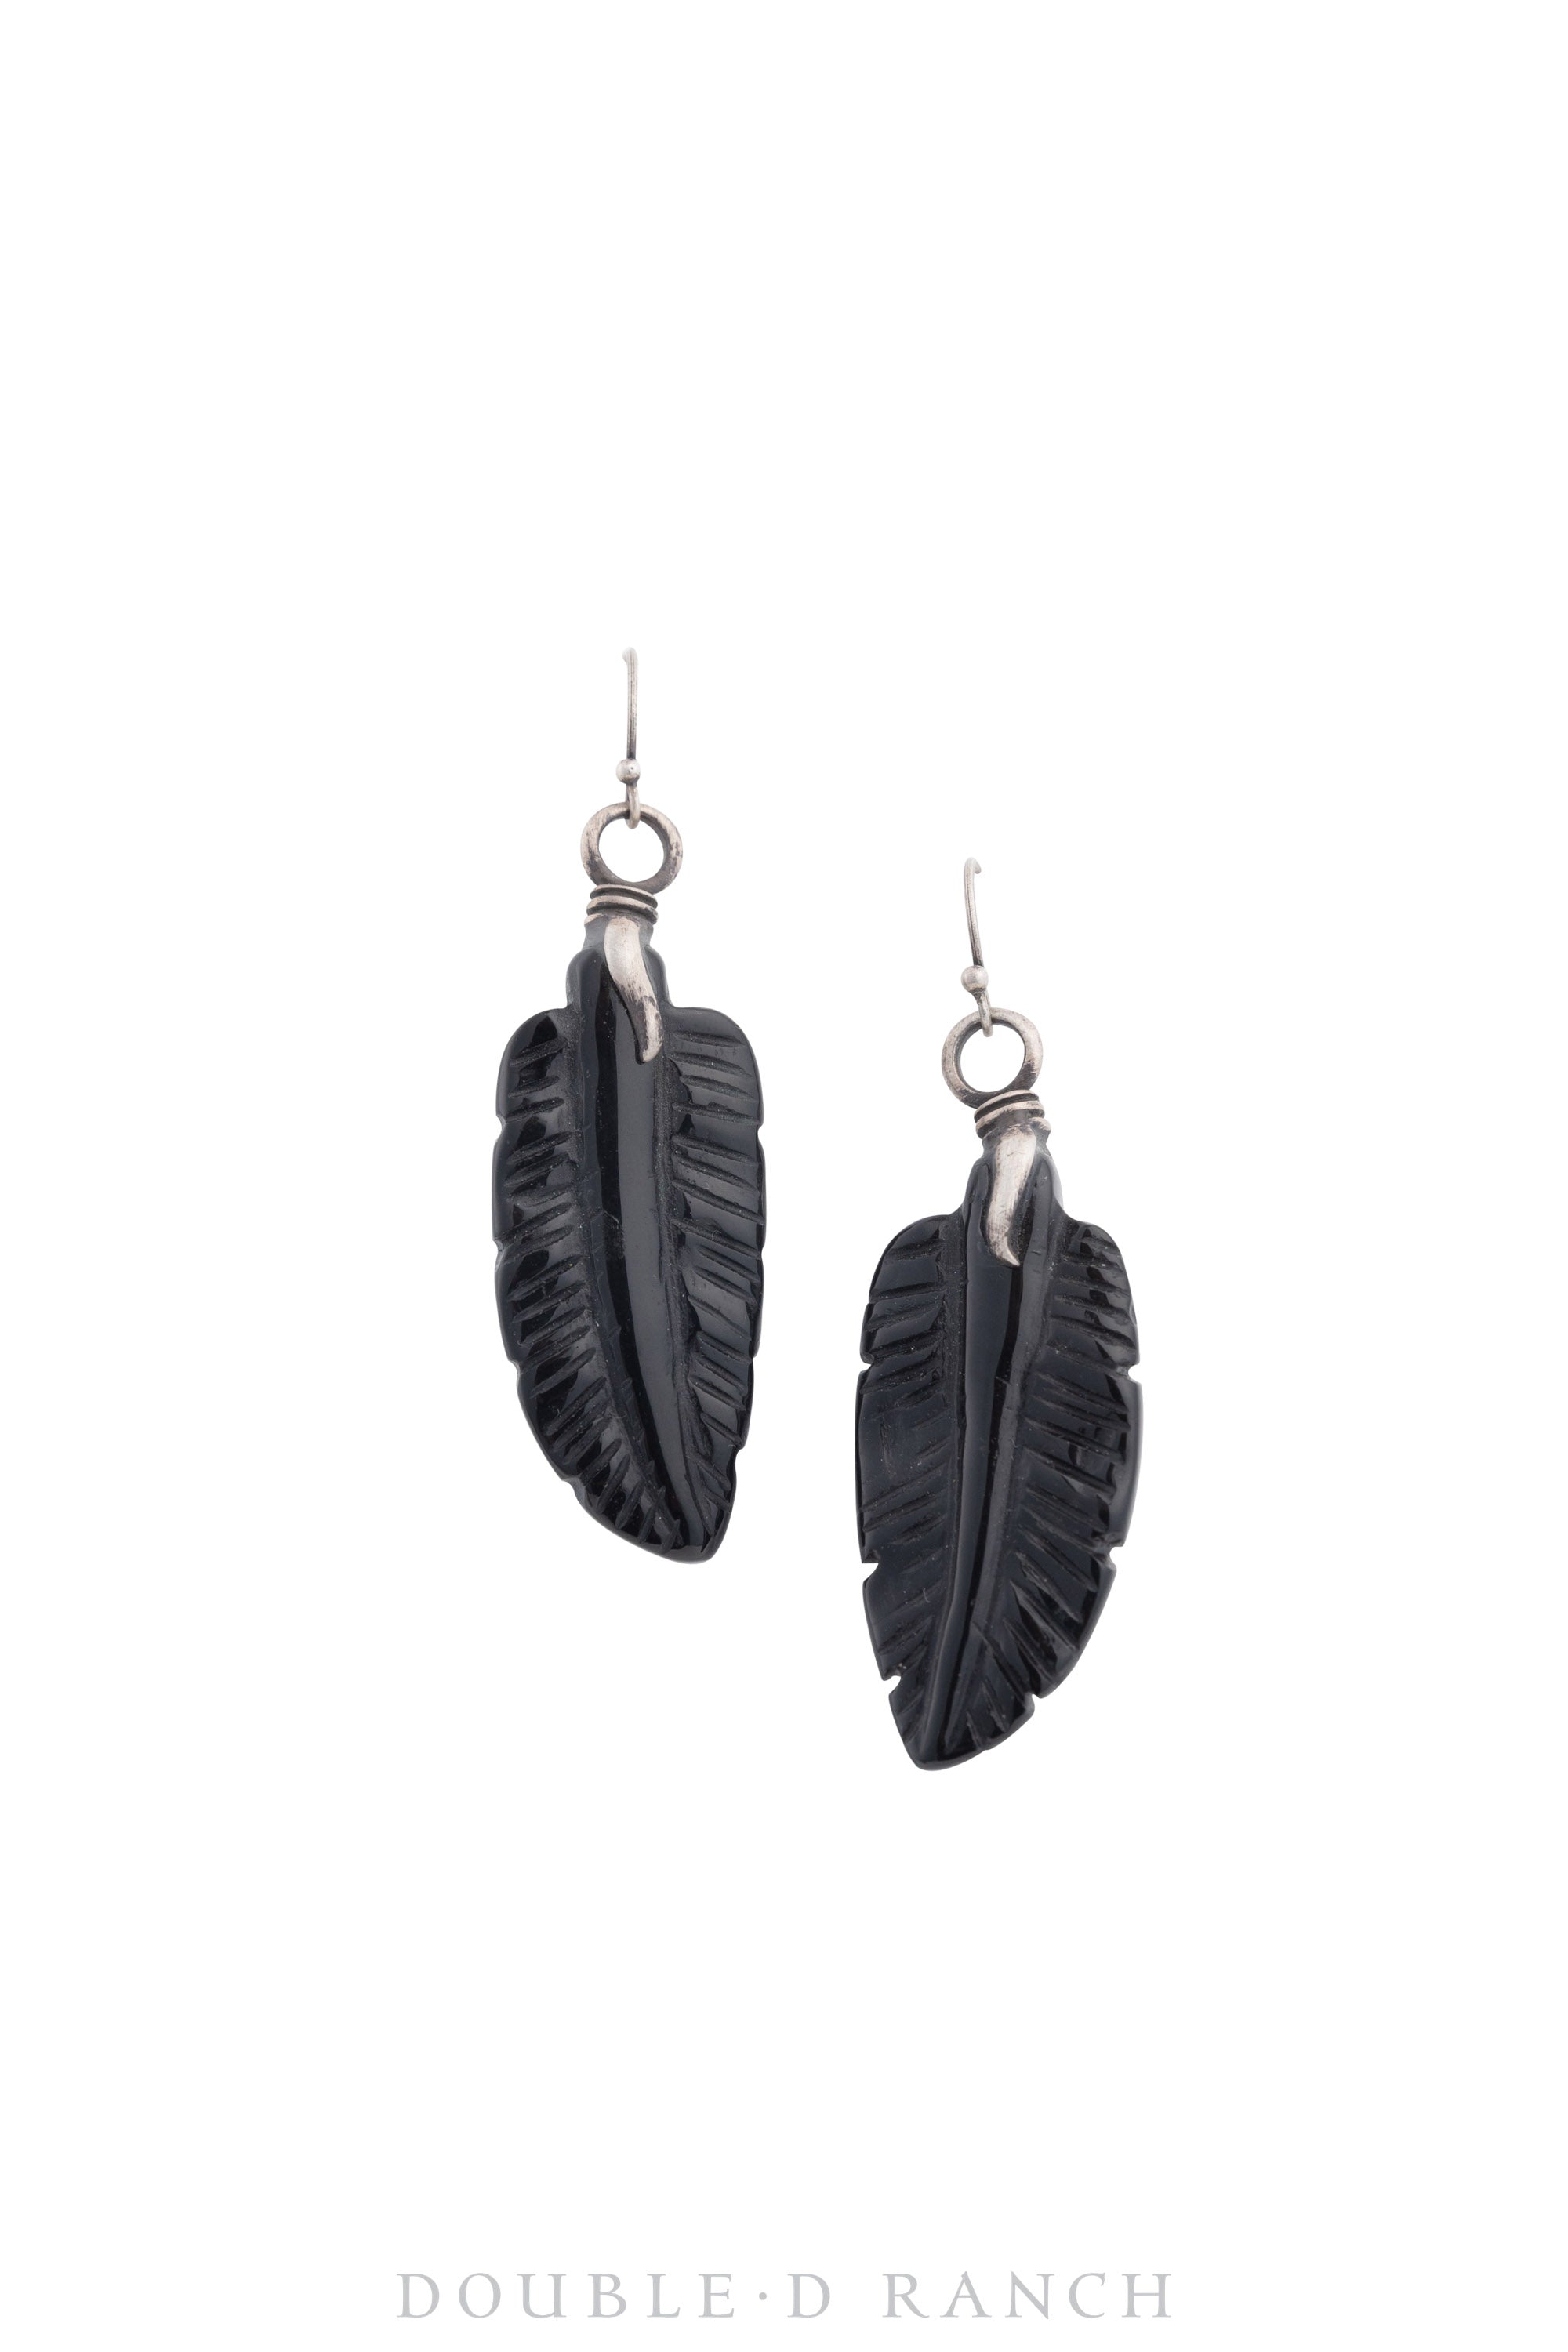 Earrings, Dangles, Onyx, Carved Feathers, Contemporary, 1498